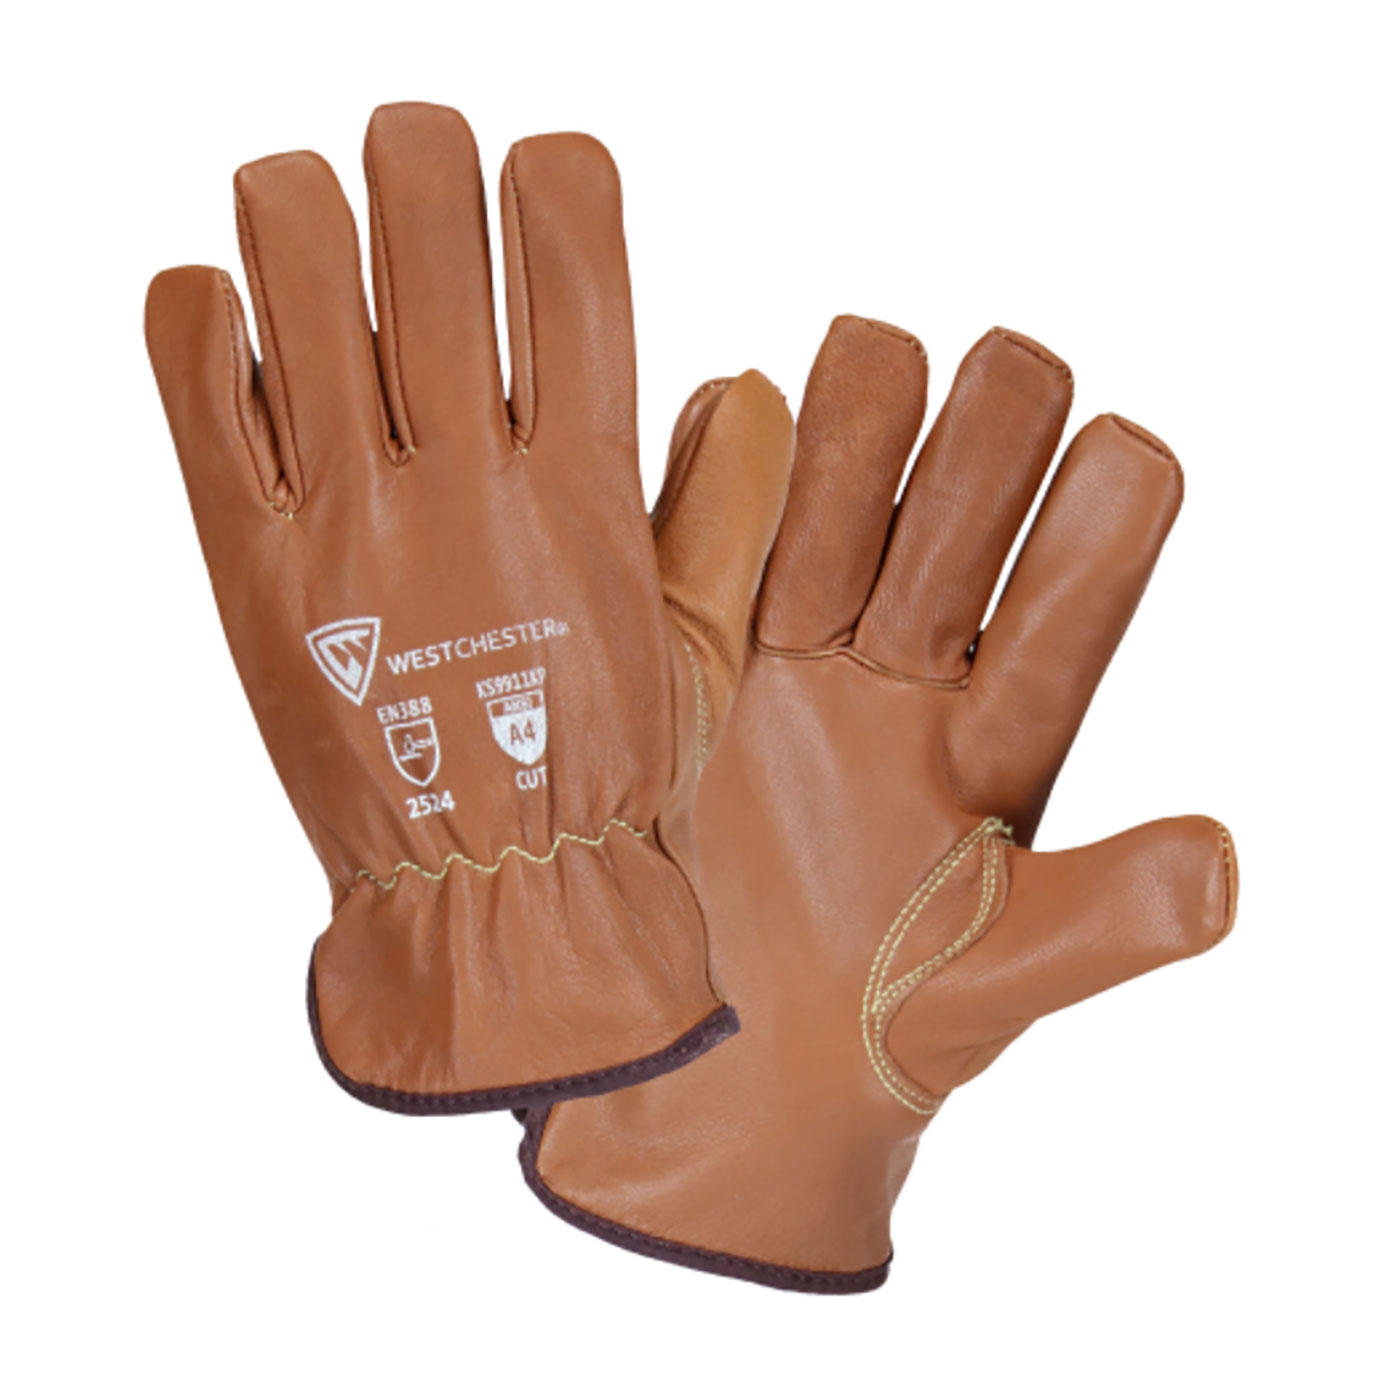 KS9911KP PIP® West Chester® Top Grain Goatskin Leather Drivers Glove with Para-Aramid and Fleece Lining feature Oil Armor™